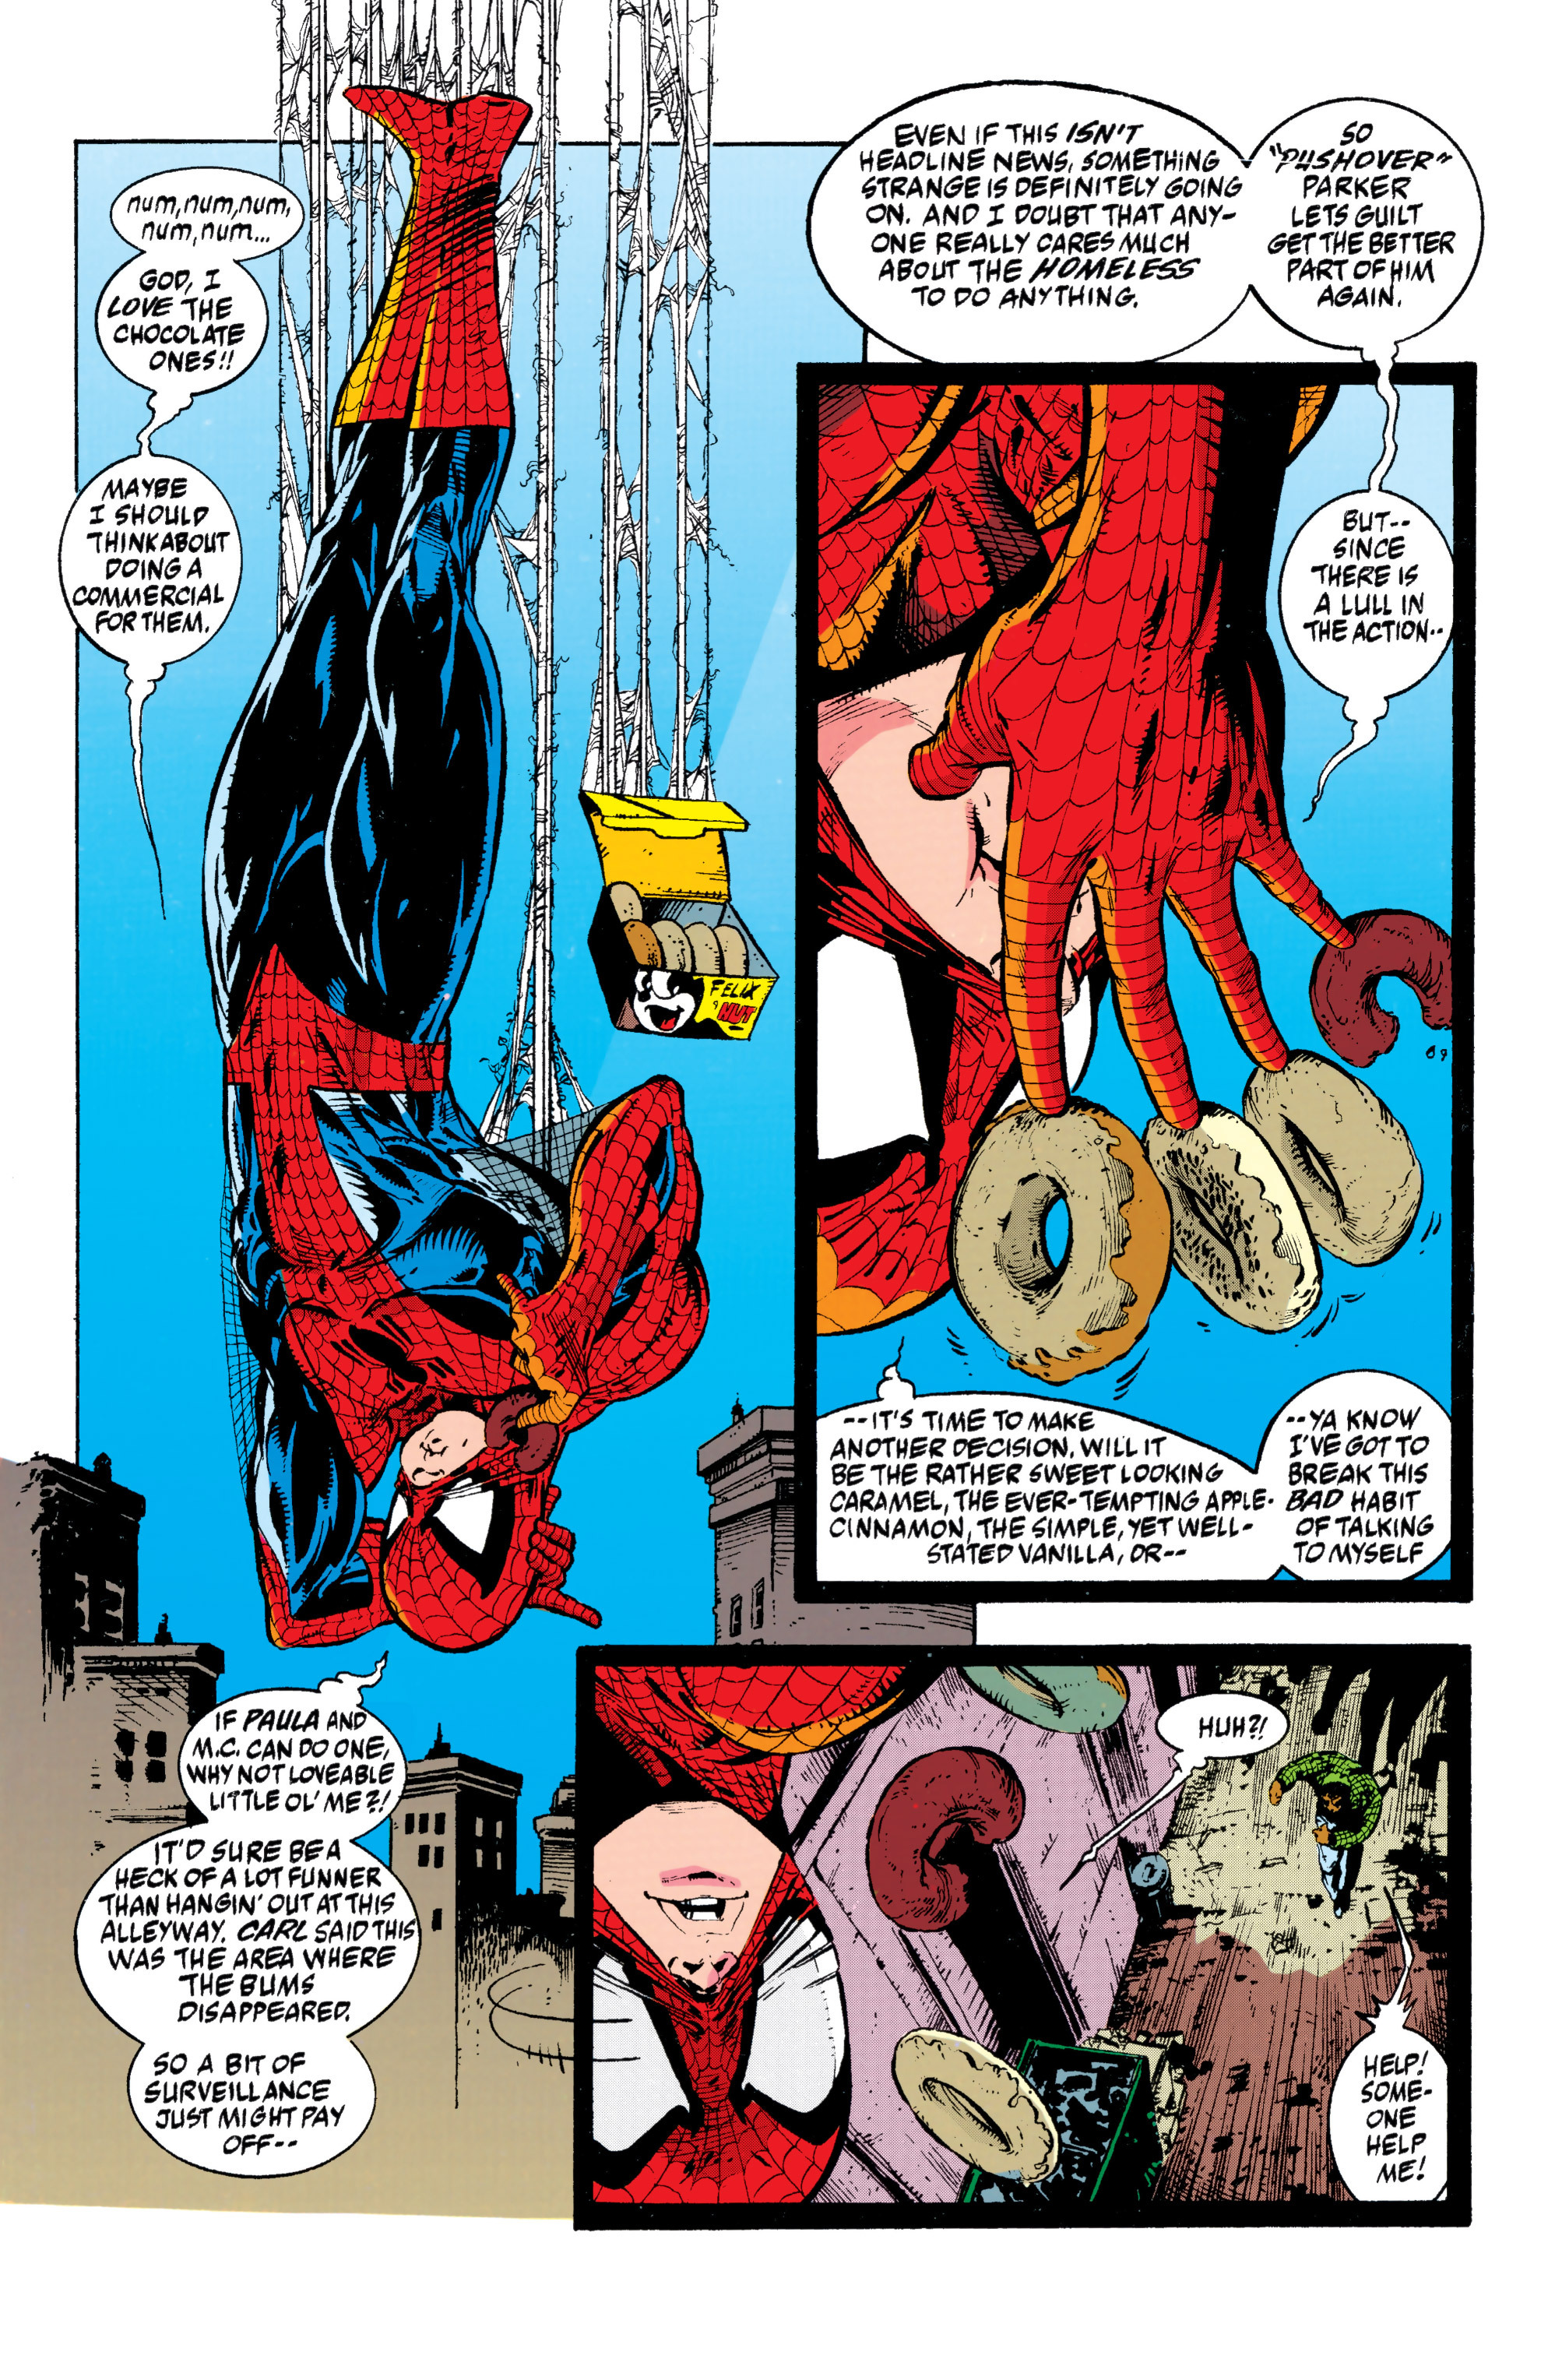 Spider-Man (1990) 13_-_Sub_City_Part_1_of_2 Page 8